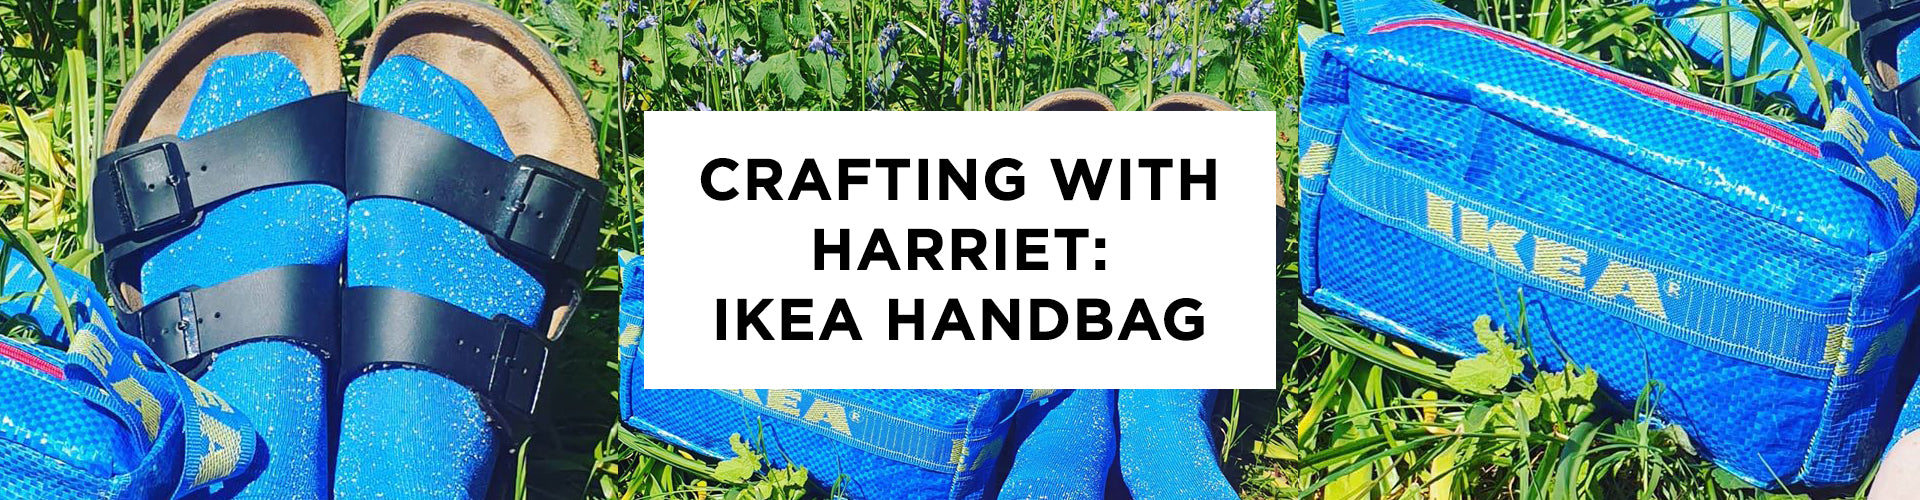 Crafting at Home With Harriet: IKEA bag